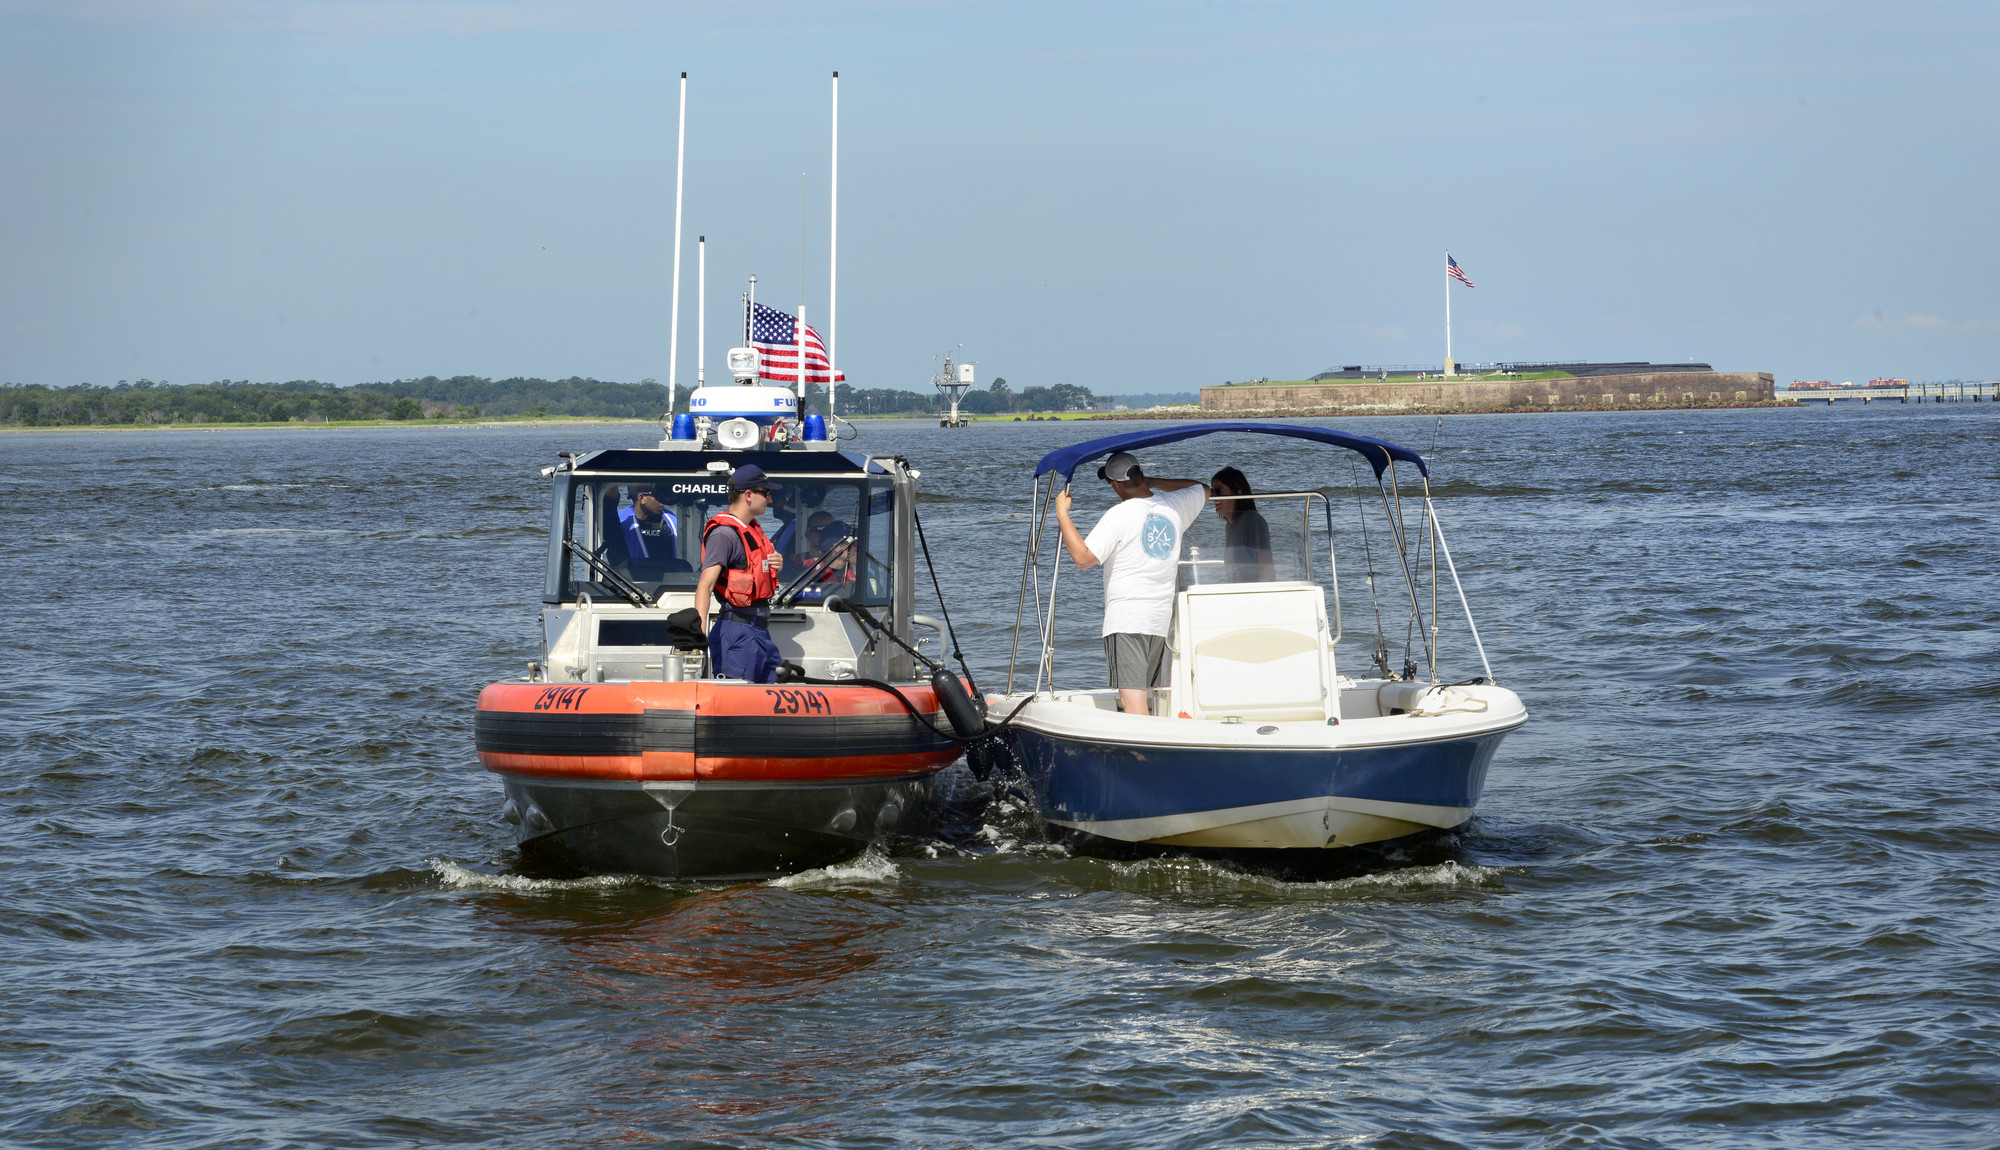 A U.S. Coast Guard response boat stops a recreational boater in the Charleston Harbor, S.C. Aug. 11, 2018, as part of Operation SHRIMP and GRITS, a multi-state and multi-jurisdiction maritime enforcement operation. The name stands for “Save Harbor Reach on Intelligence for Multi-state Partnerships and Guarding Responsible Interests for Target Safety.” One of the objectives of this operation is to unify and coordinate investigative efforts between federal, state and local agency assets. (U.S. Air Force photo by Senior Airman Tenley Long) 